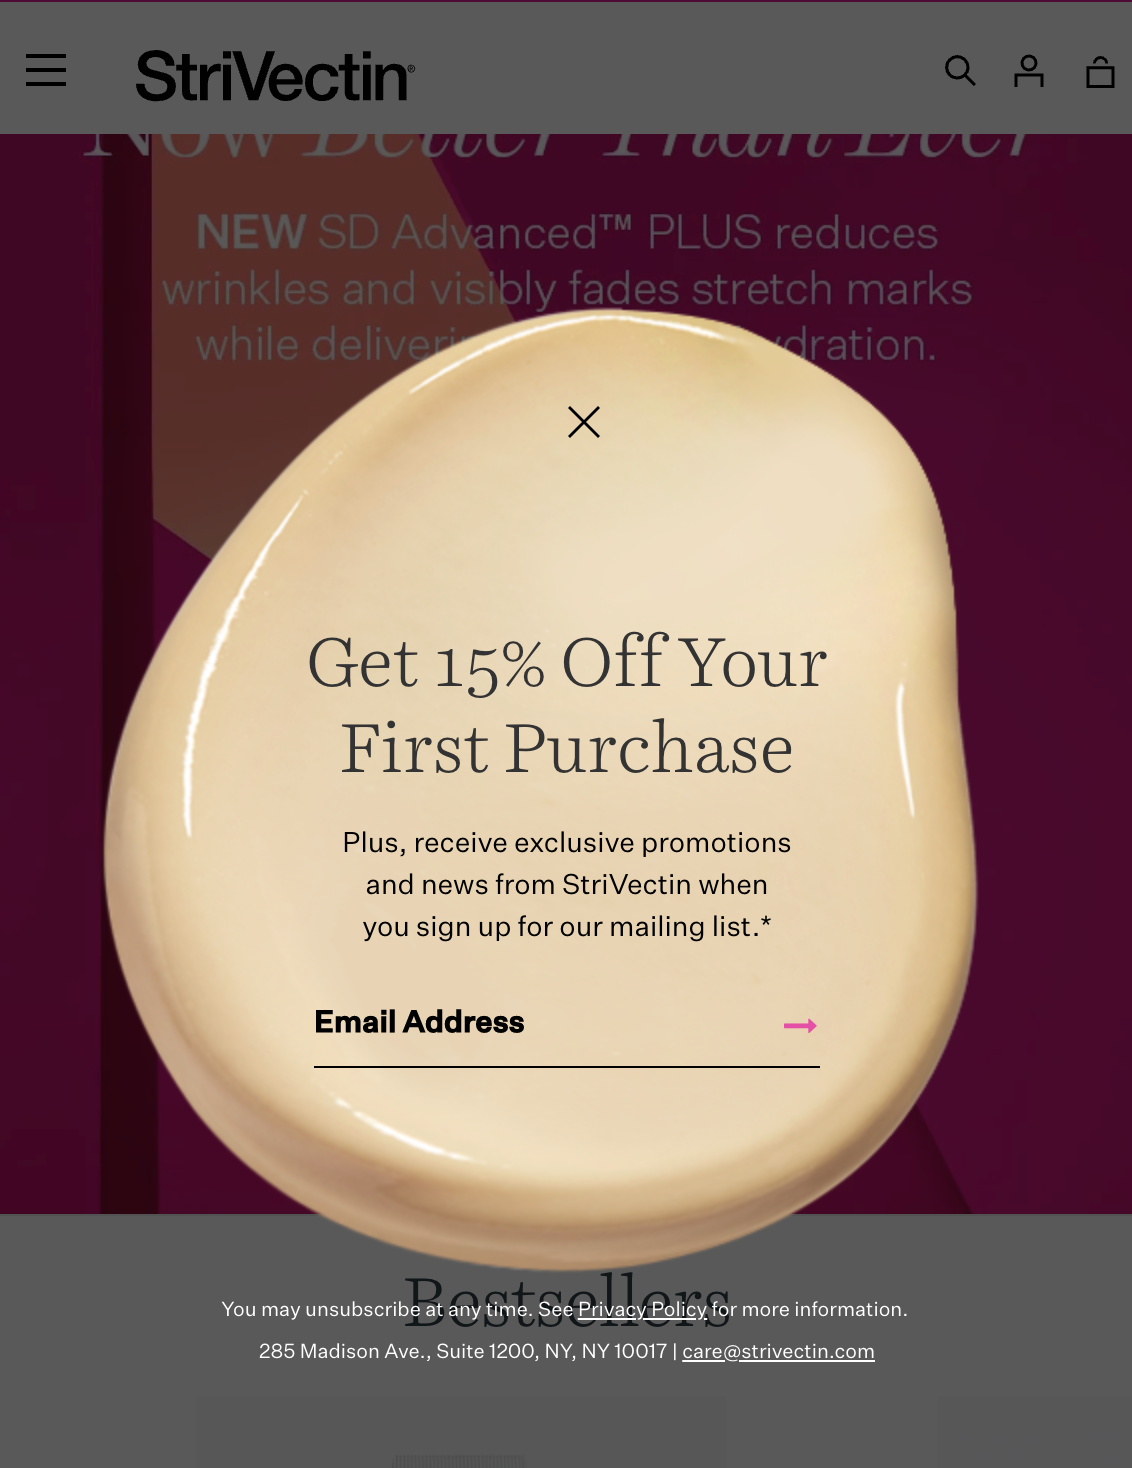 This is one of the website popup ideas used on Strivectin.com